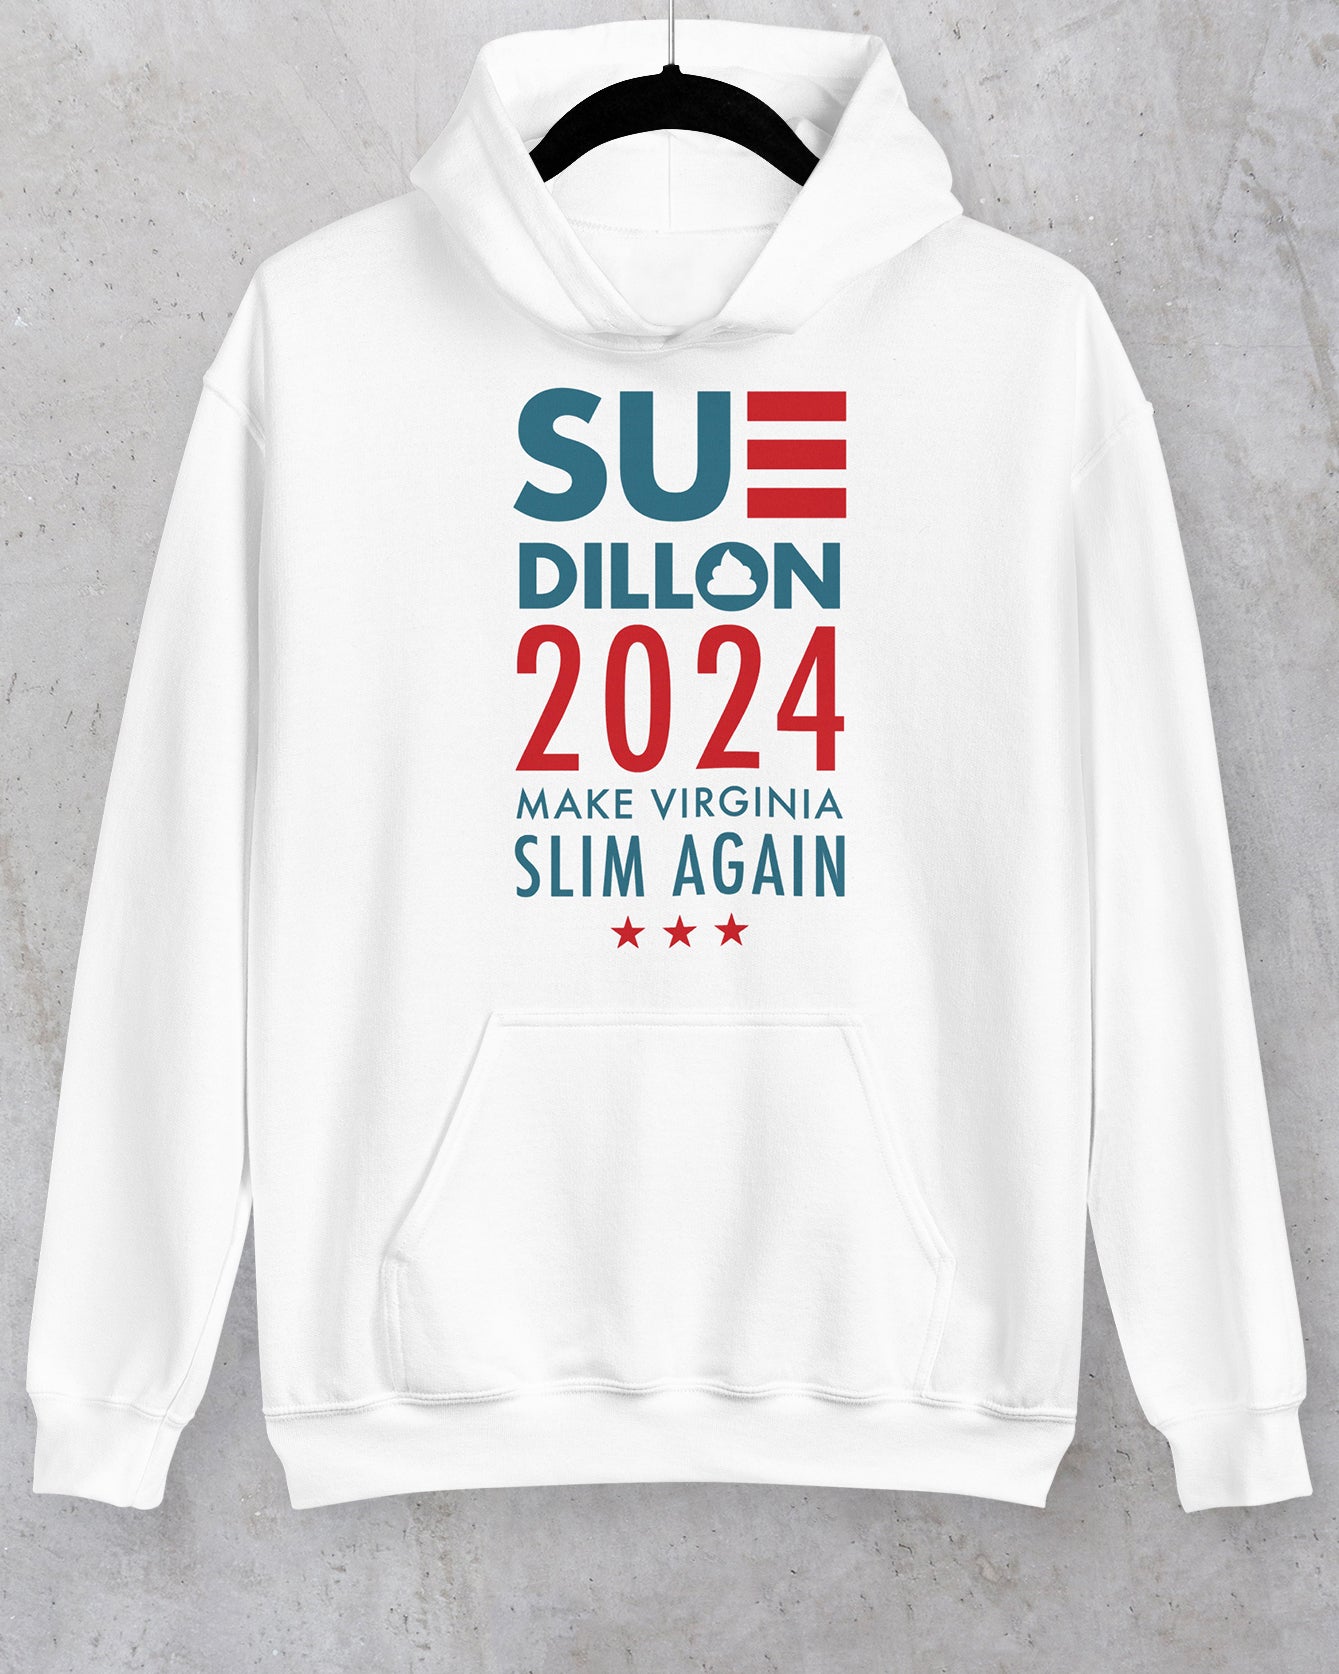 The Campaign Hoodie